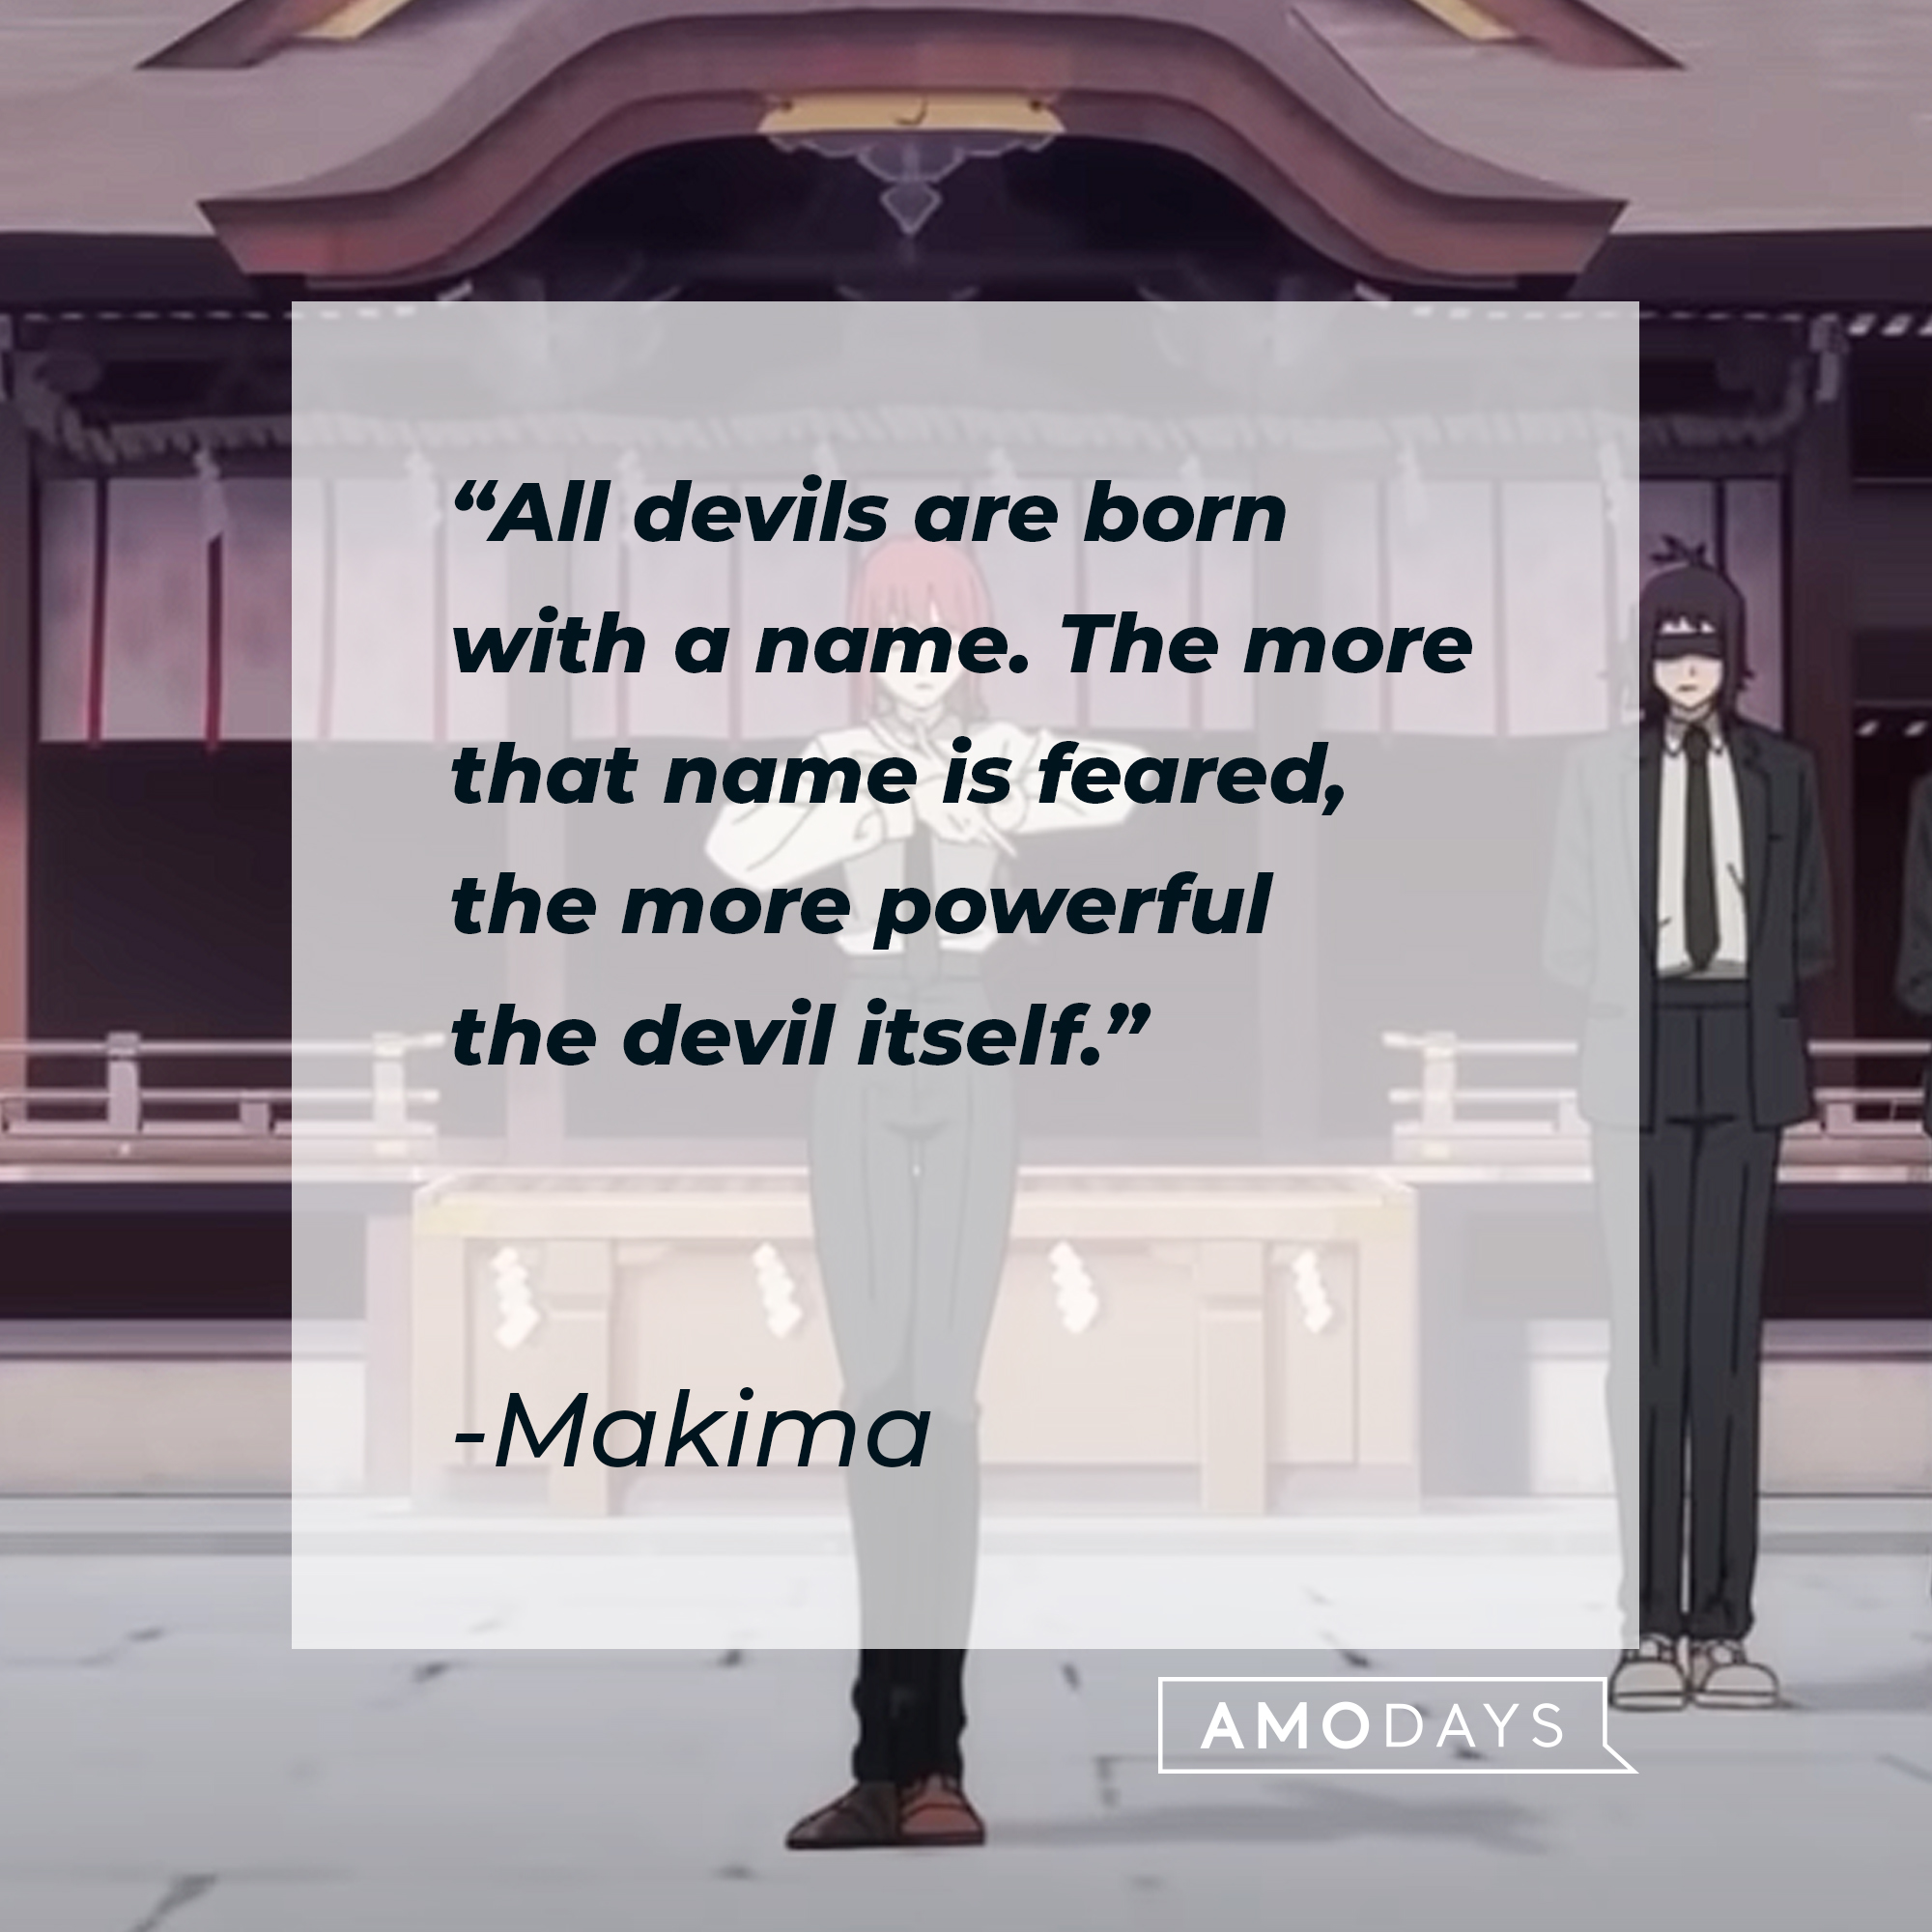 An image of Makima with her quote: “All devils are born with a name. The more that name is feared, the more powerful the devil itself.” | Source: youtube.com/CrunchyrollCollection